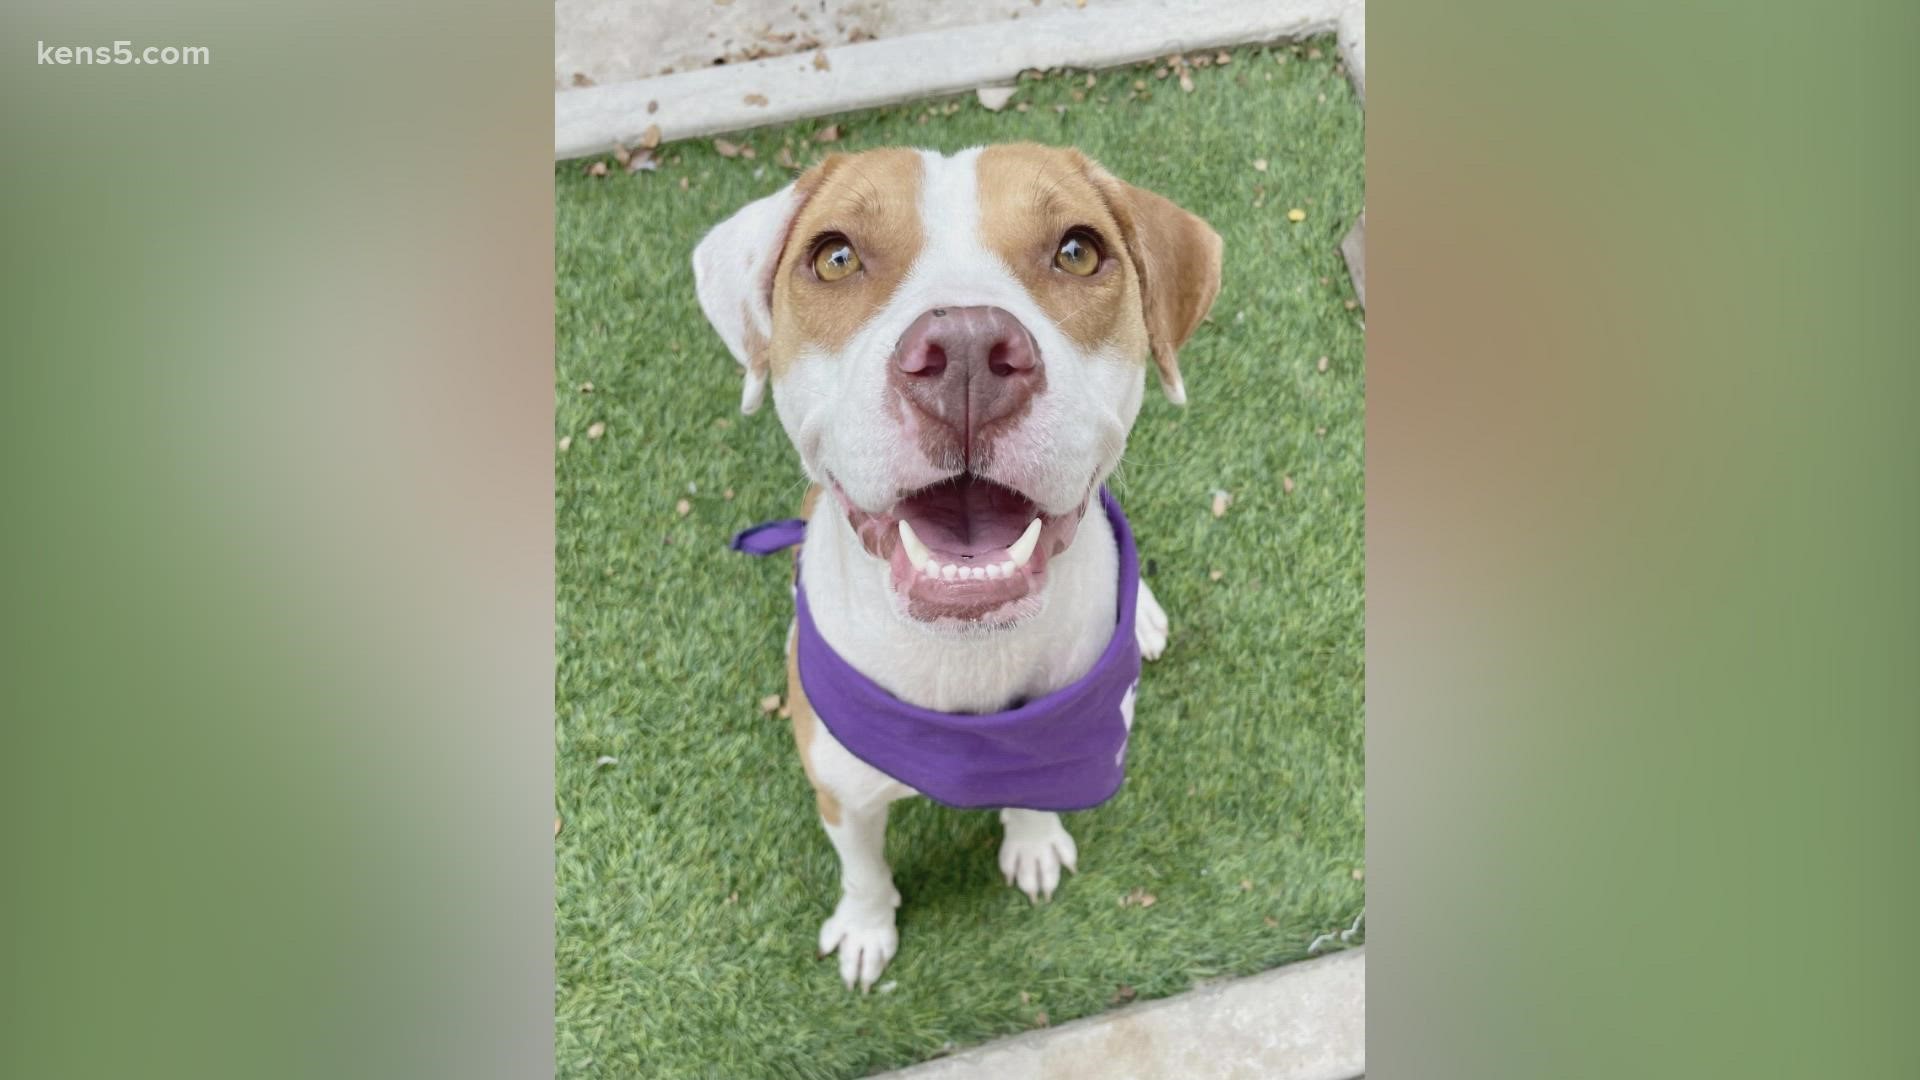 Nebula is a rescue dog from Louisiana who was brought over to San Antonio due to Hurricane Ida. She's sweet, playful and loves to give kisses. She's up for adoption.